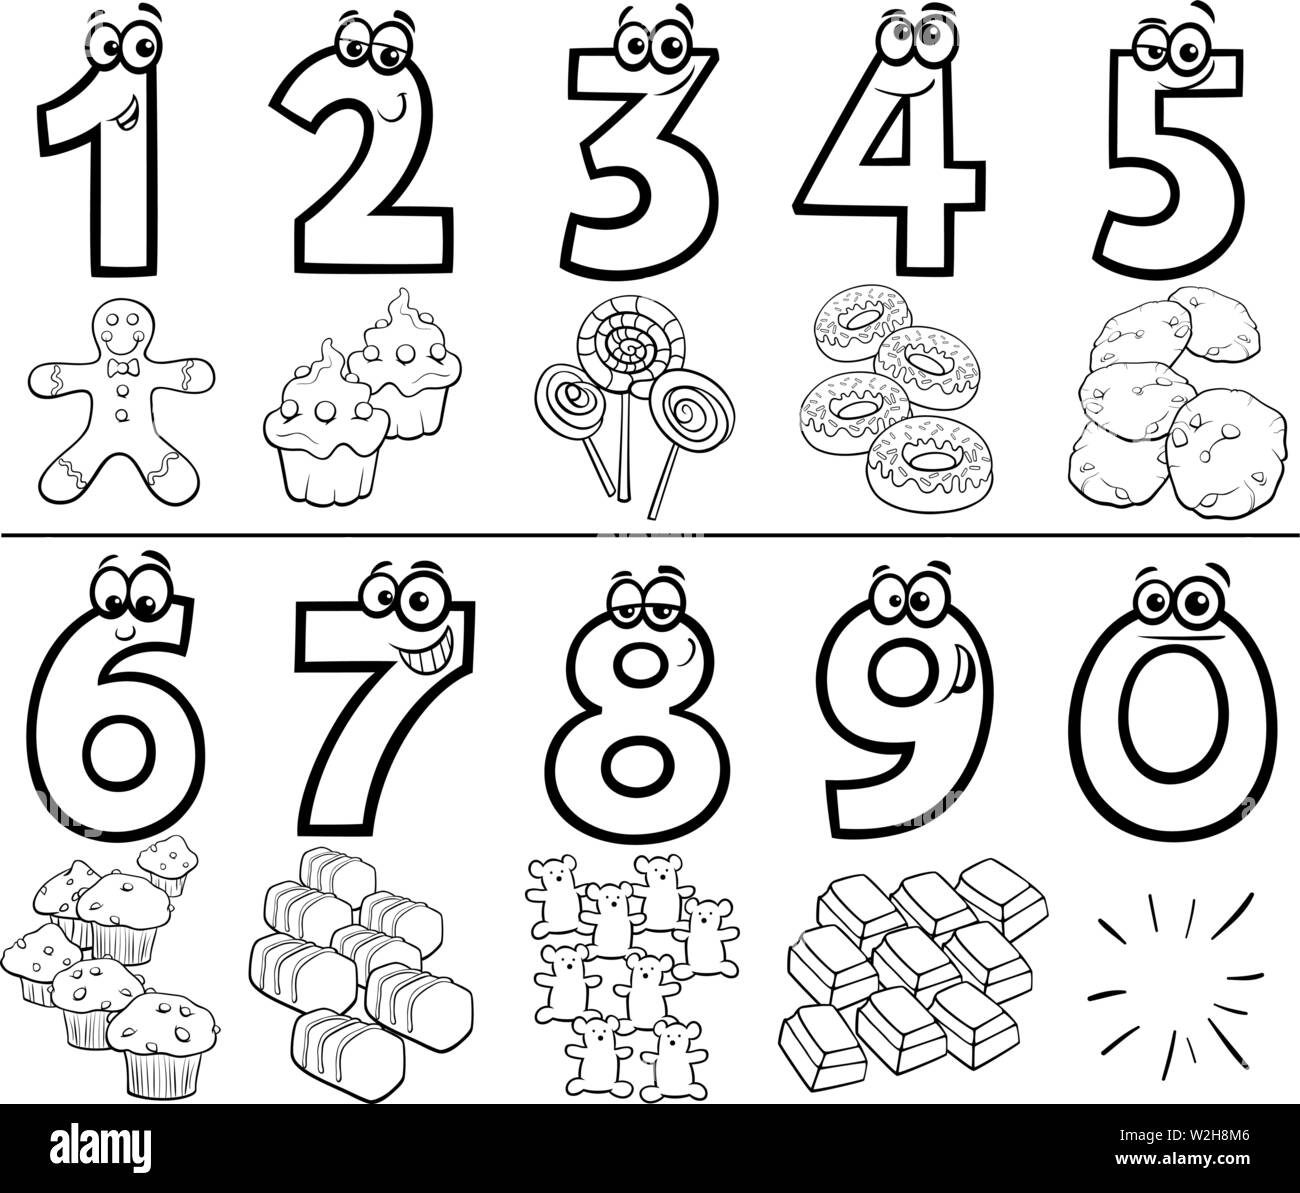 Black and White Cartoon Illustration of Educational Numbers Collection from One to Nine with Sweet Food Objects Coloring Book Stock Vector